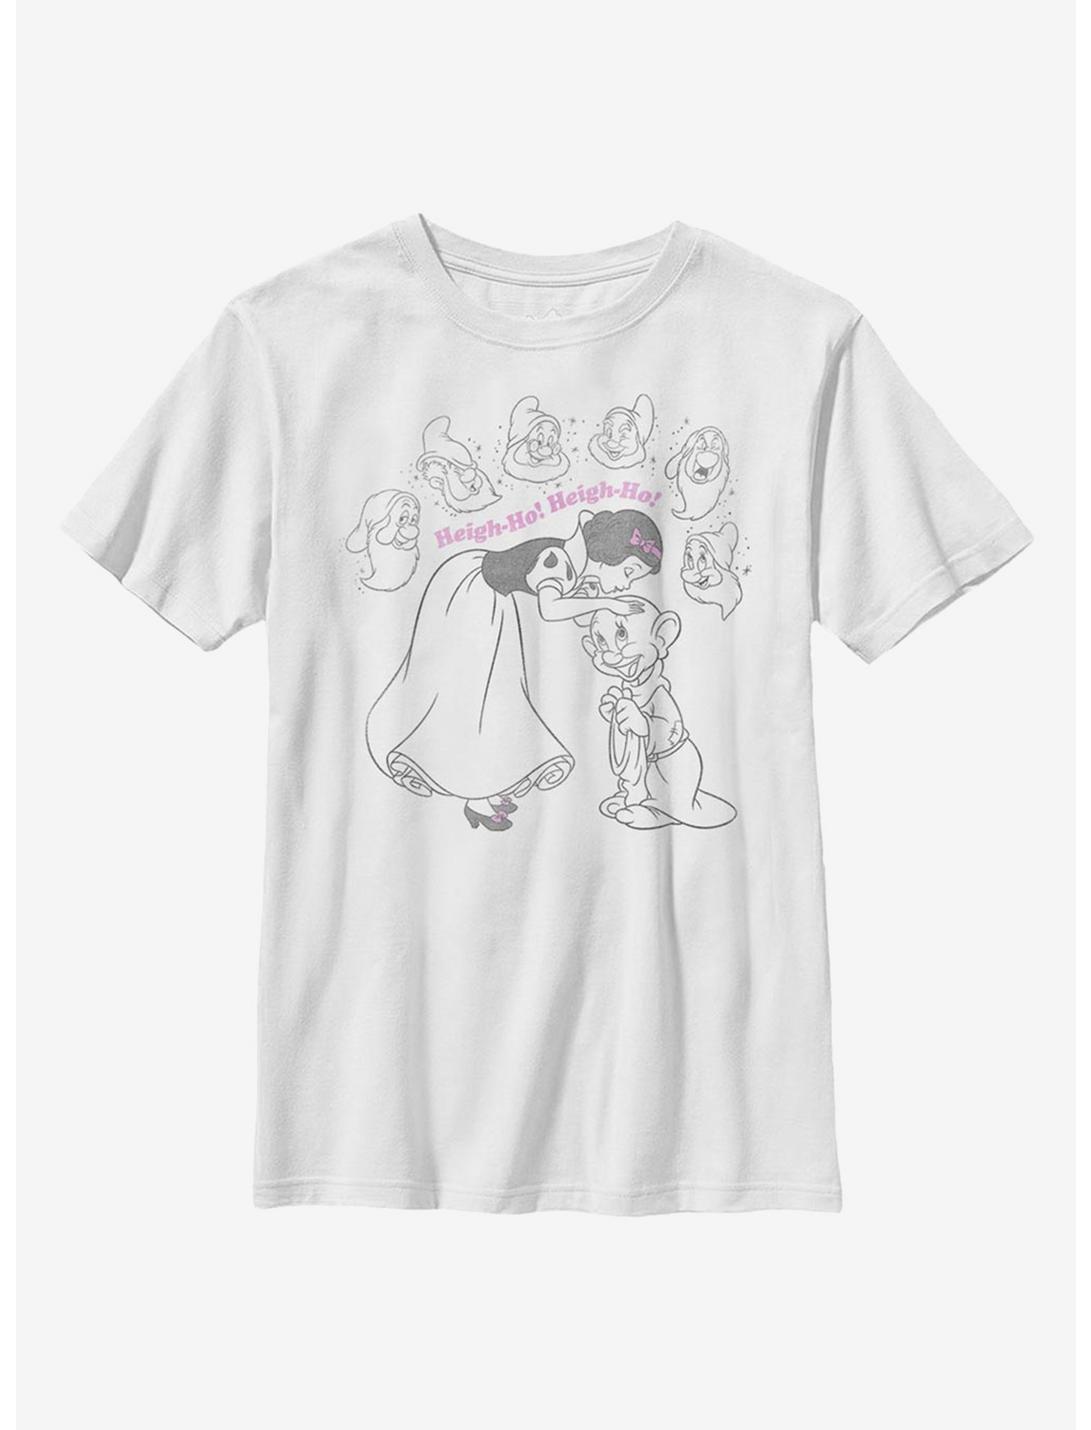 Disney Snow White And The Seven Dwarfs Heigh-Ho Youth T-Shirt, WHITE, hi-res